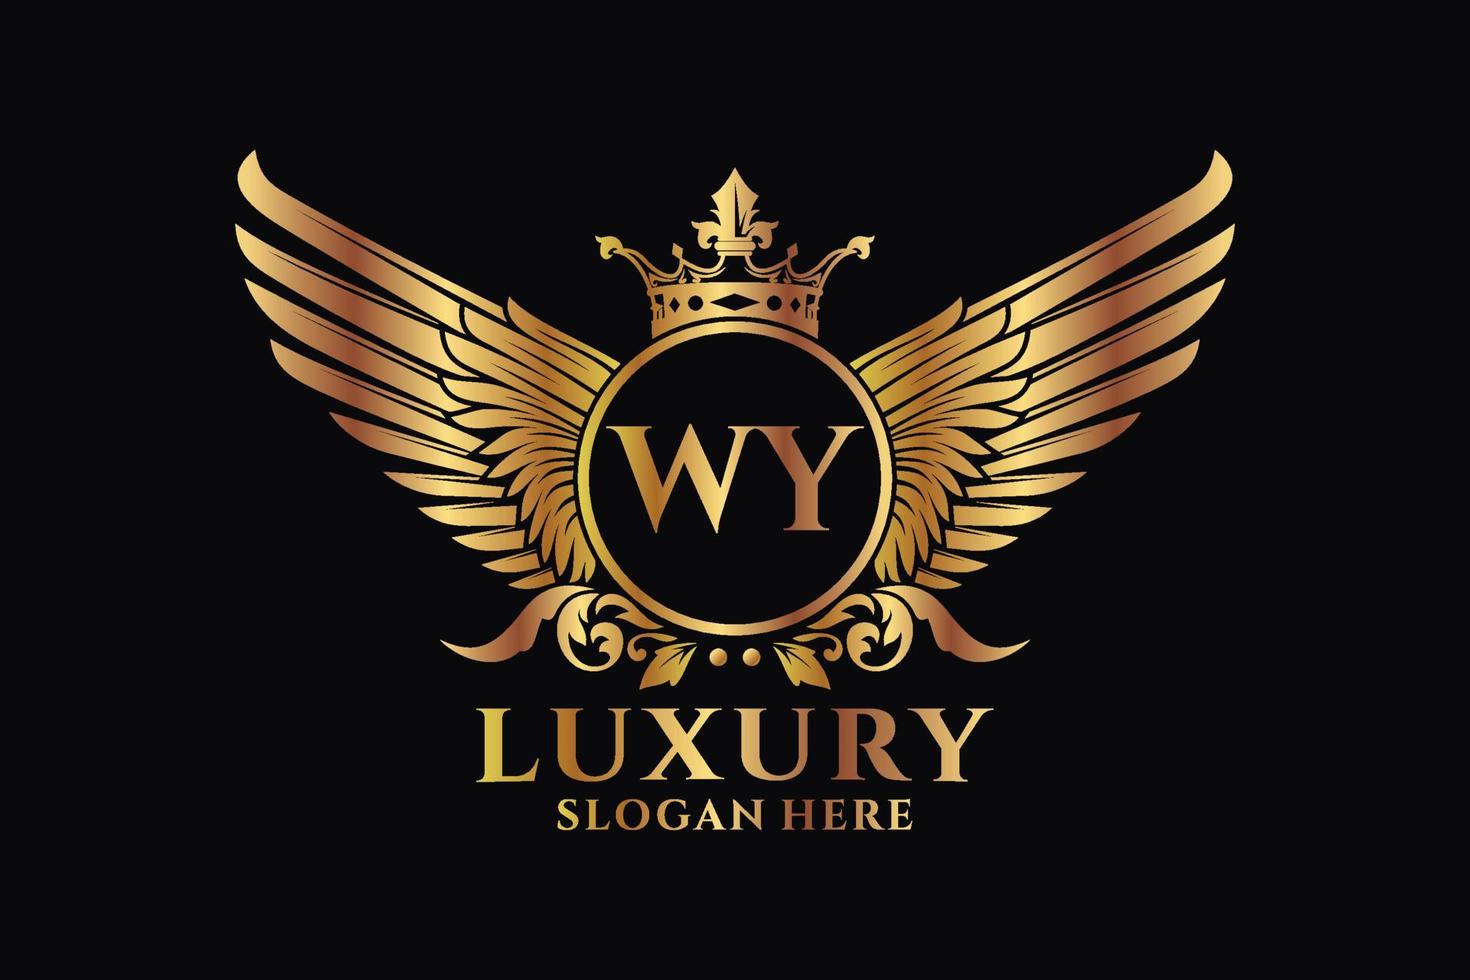 Luxury royal wing Letter WY crest Gold color Logo vector, Victory logo, crest logo, wing logo, vector logo template.